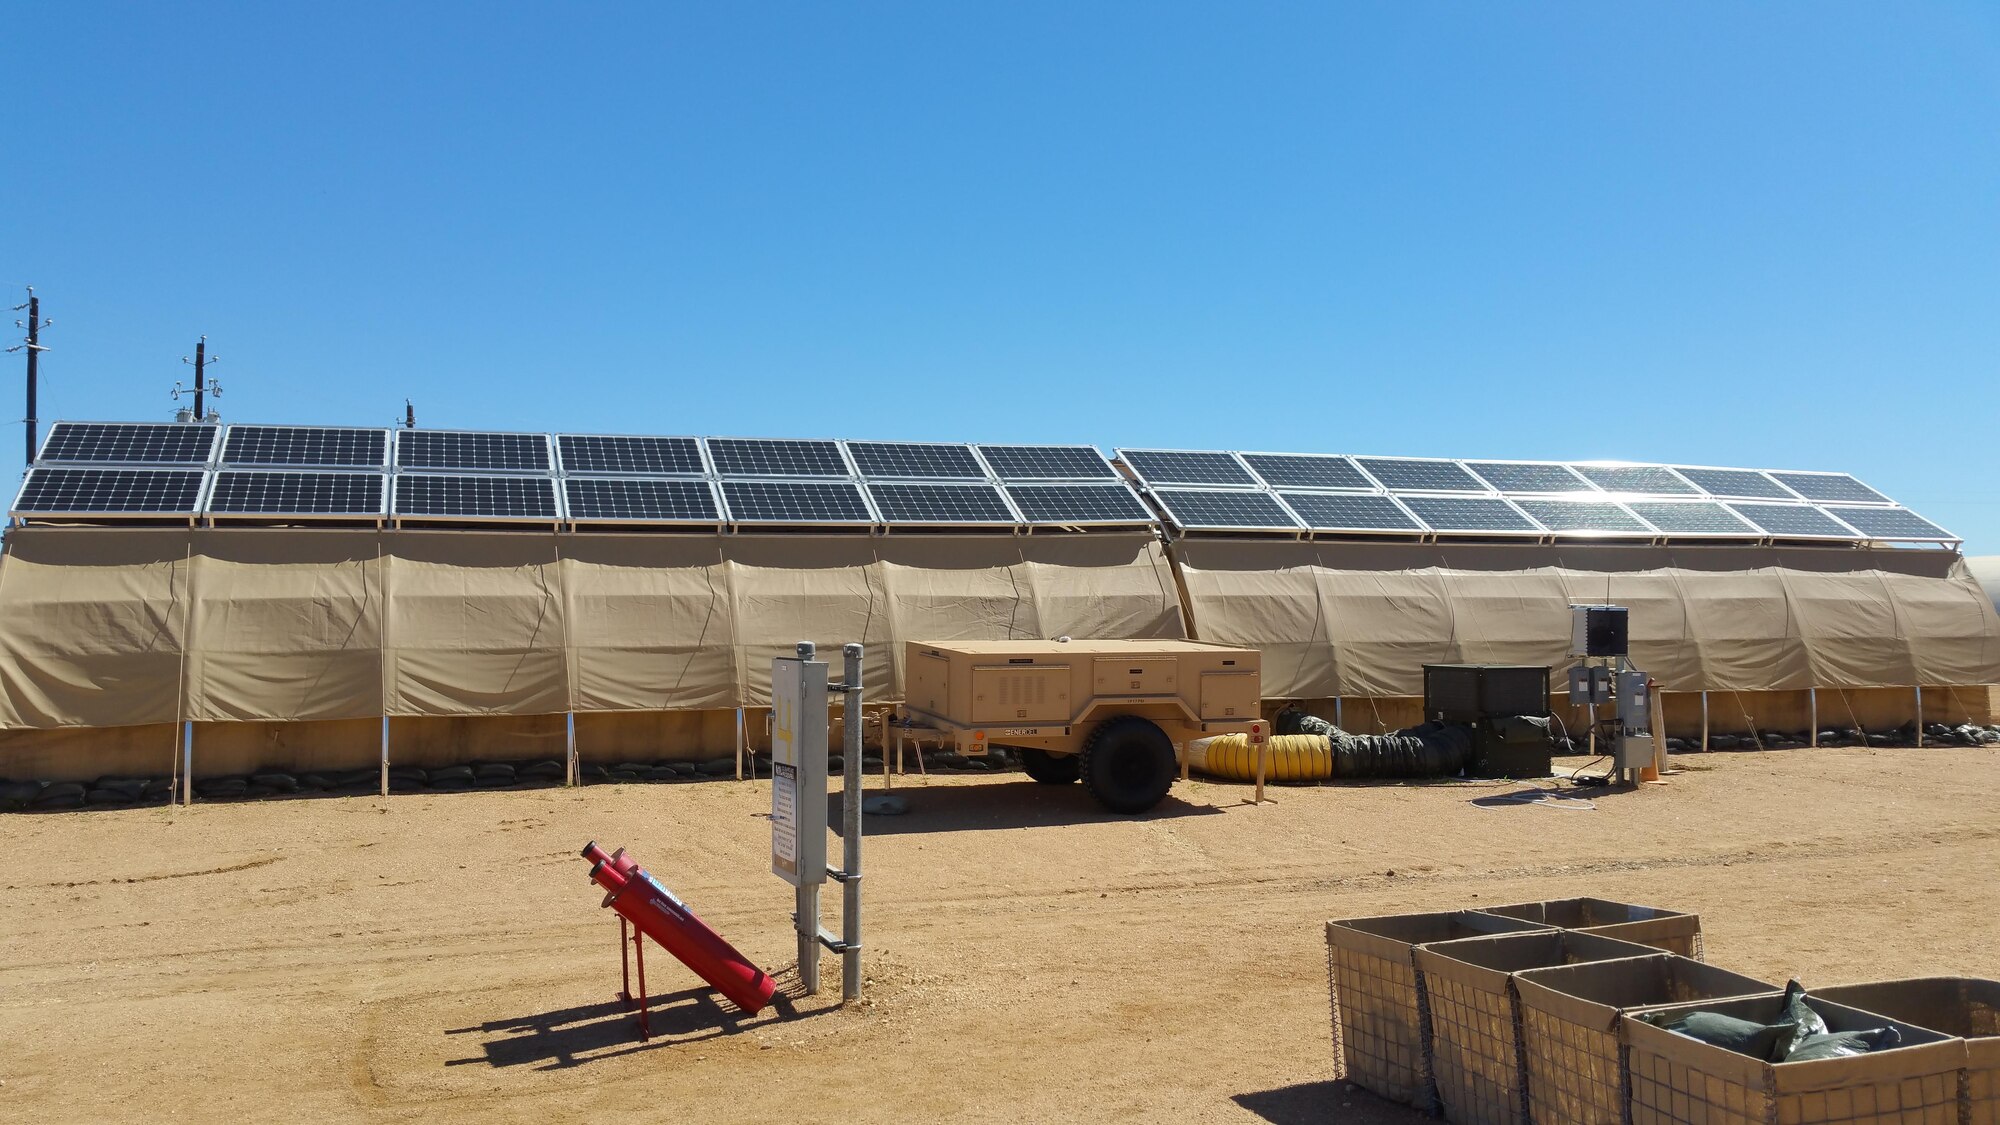 Part of AFRL's Forward Operating Base of the Future demonstration is one complete expeditionary microgrid system at Basic Expeditionary Airmen Skills Training (BEAST), Lackland AFB, San Antonio, Texas. Monocrystalline silicon solar panels are placed on top of each tent for energy production. A trailer (center) holds the hardware, software and lithium ion batteries that form the smart grid and provide energy backup should the grid fail. The project evaluates energy reduction technologies such as shelter insulation and efficient HVACs. (U.S. Air Force photo/Jason Goins)